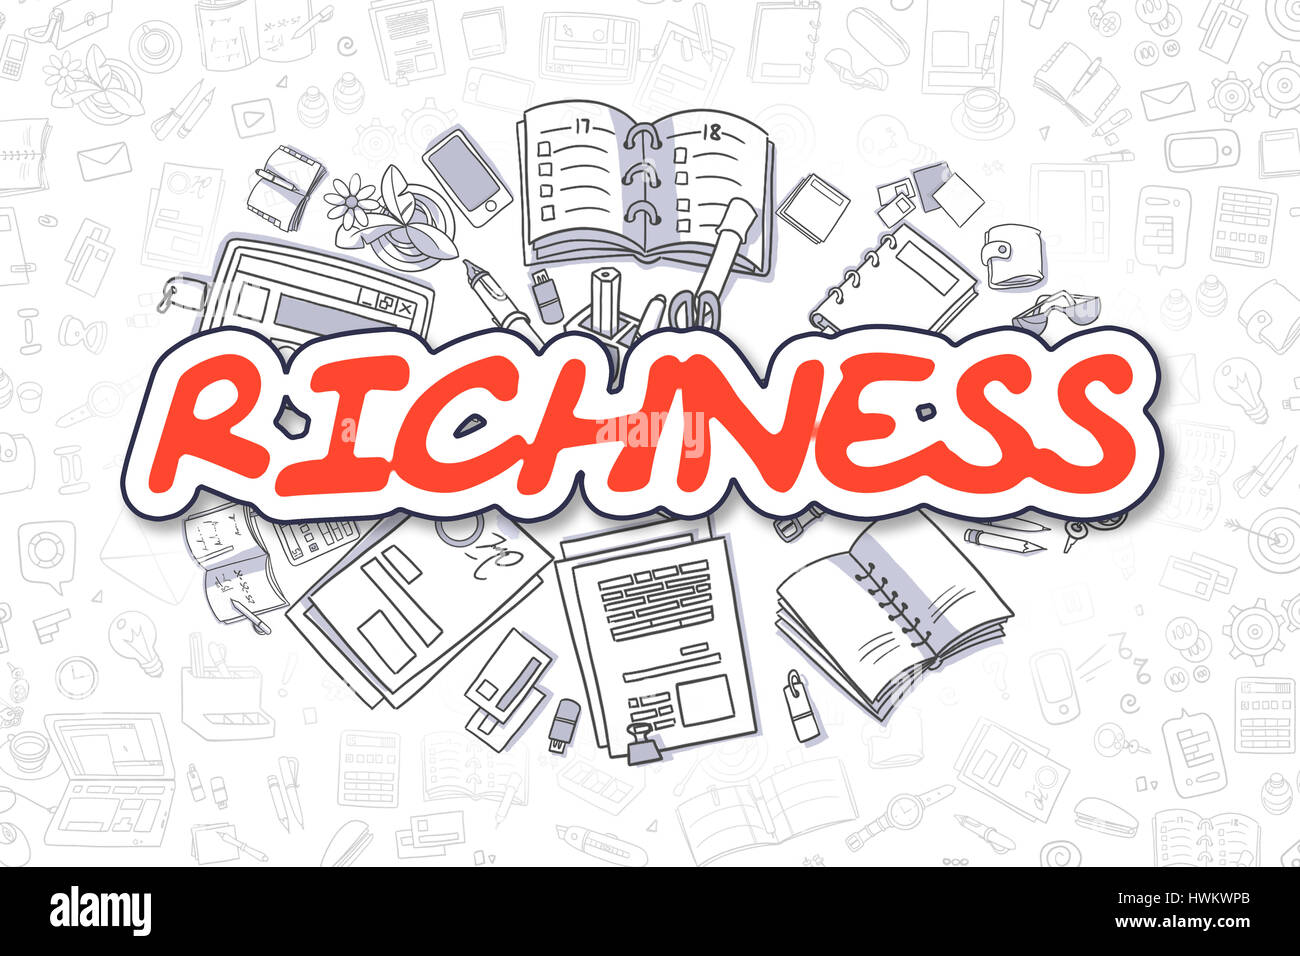 Richness - Doodle Red Text. Business Concept. Stock Photo